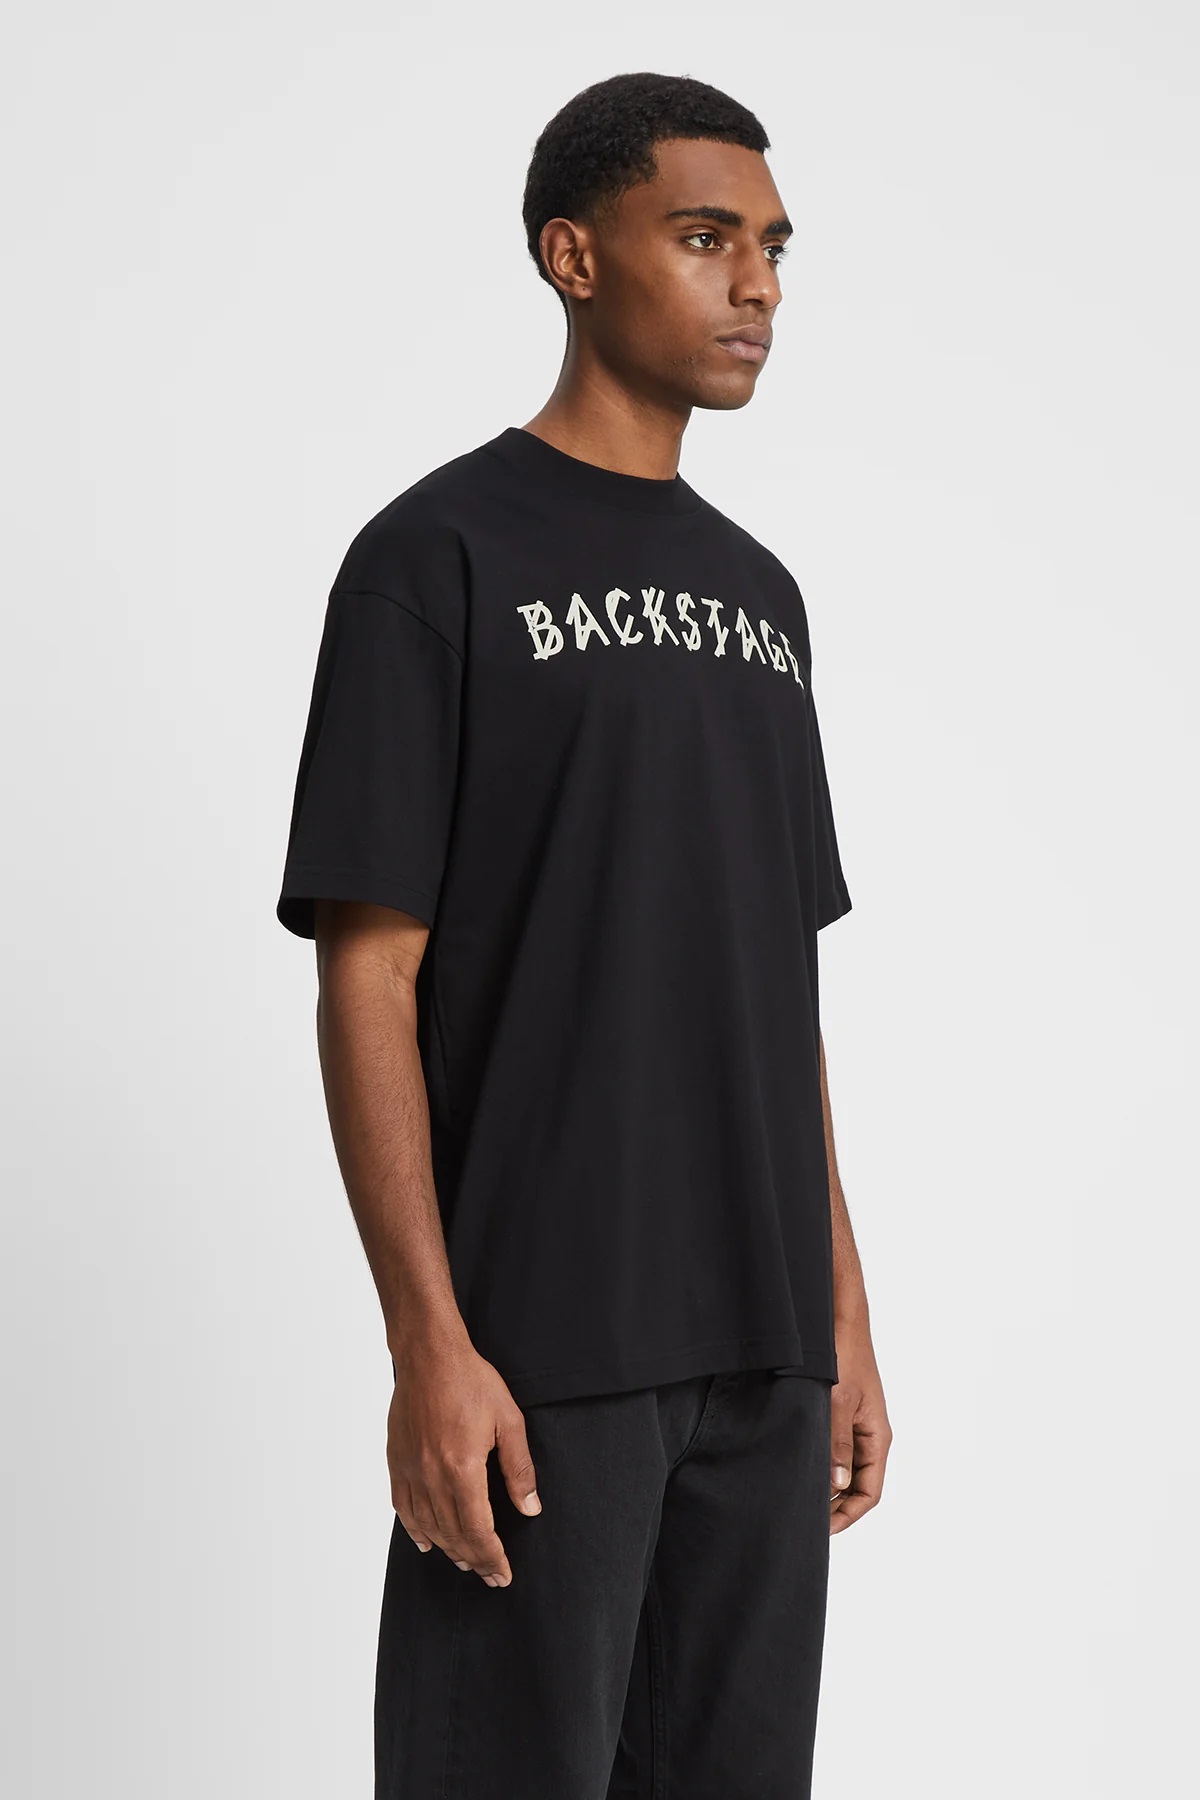 44 LABEL GROUP Backstage T-Shirt in Black XL